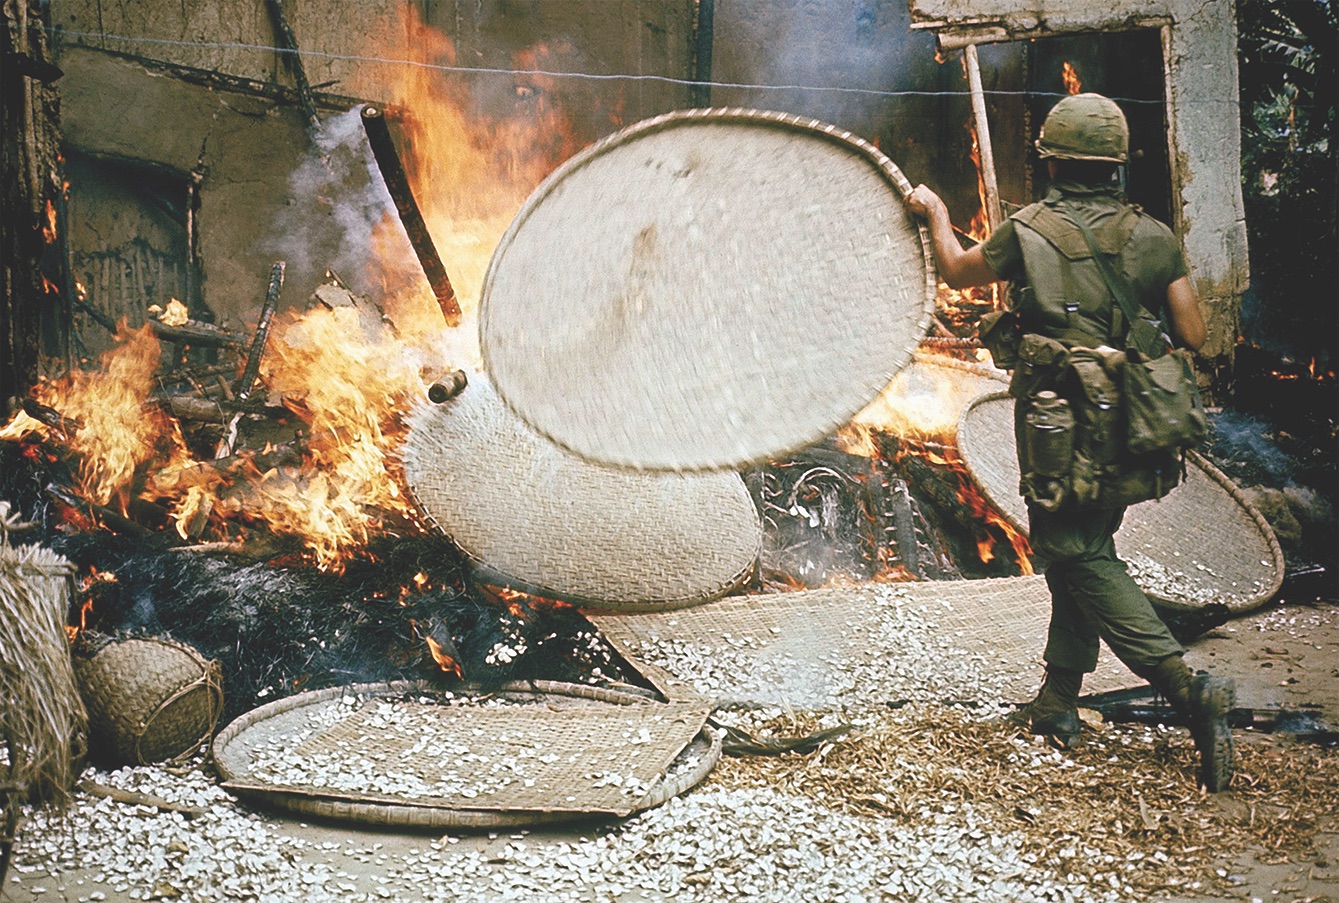 The atrocities at My Lai, burning homes and killing hundreds of civilians, occurred before Powell’s second tour, but he faced questions about the Army’s cover-up of the incident. (Ronald S. Haeberle; The Life Images Collection via Getty Images)